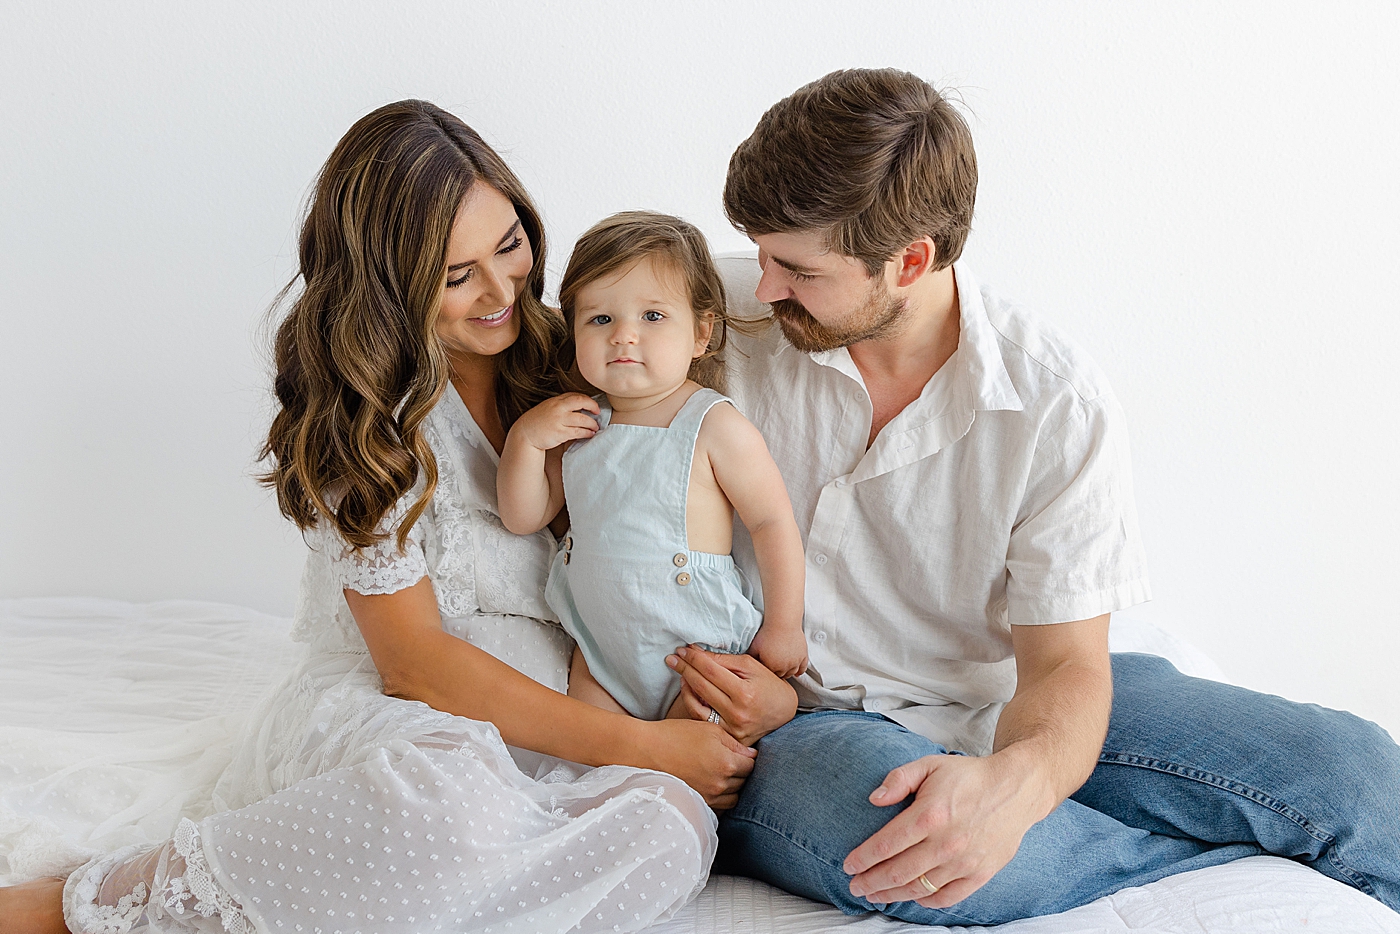 Mom and dad interacting with their toddler during their Studio Family Session | Photo by Sana Ahmed Photography